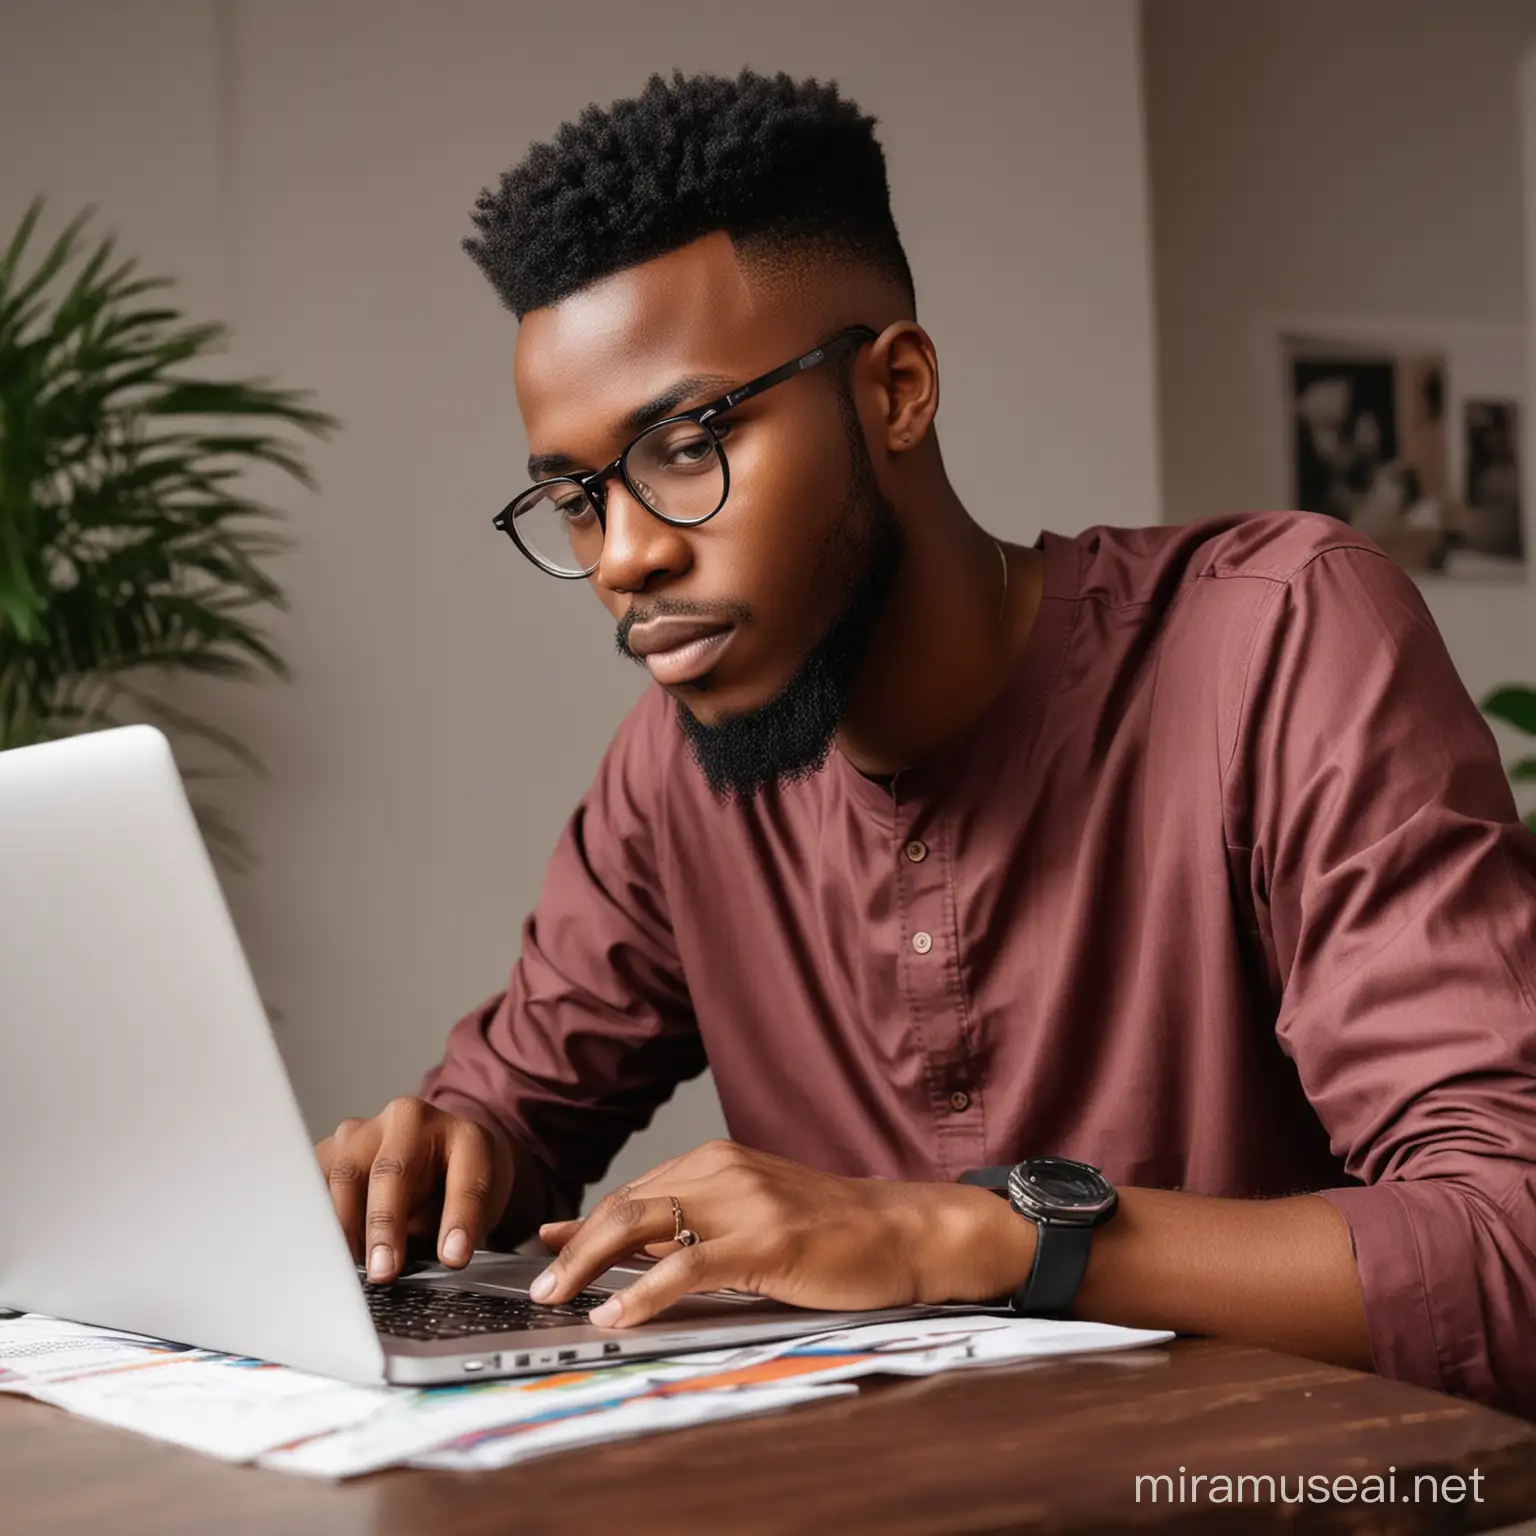 Graphic Design Course Learn Graphic Design with a Laptop for 500 Naira